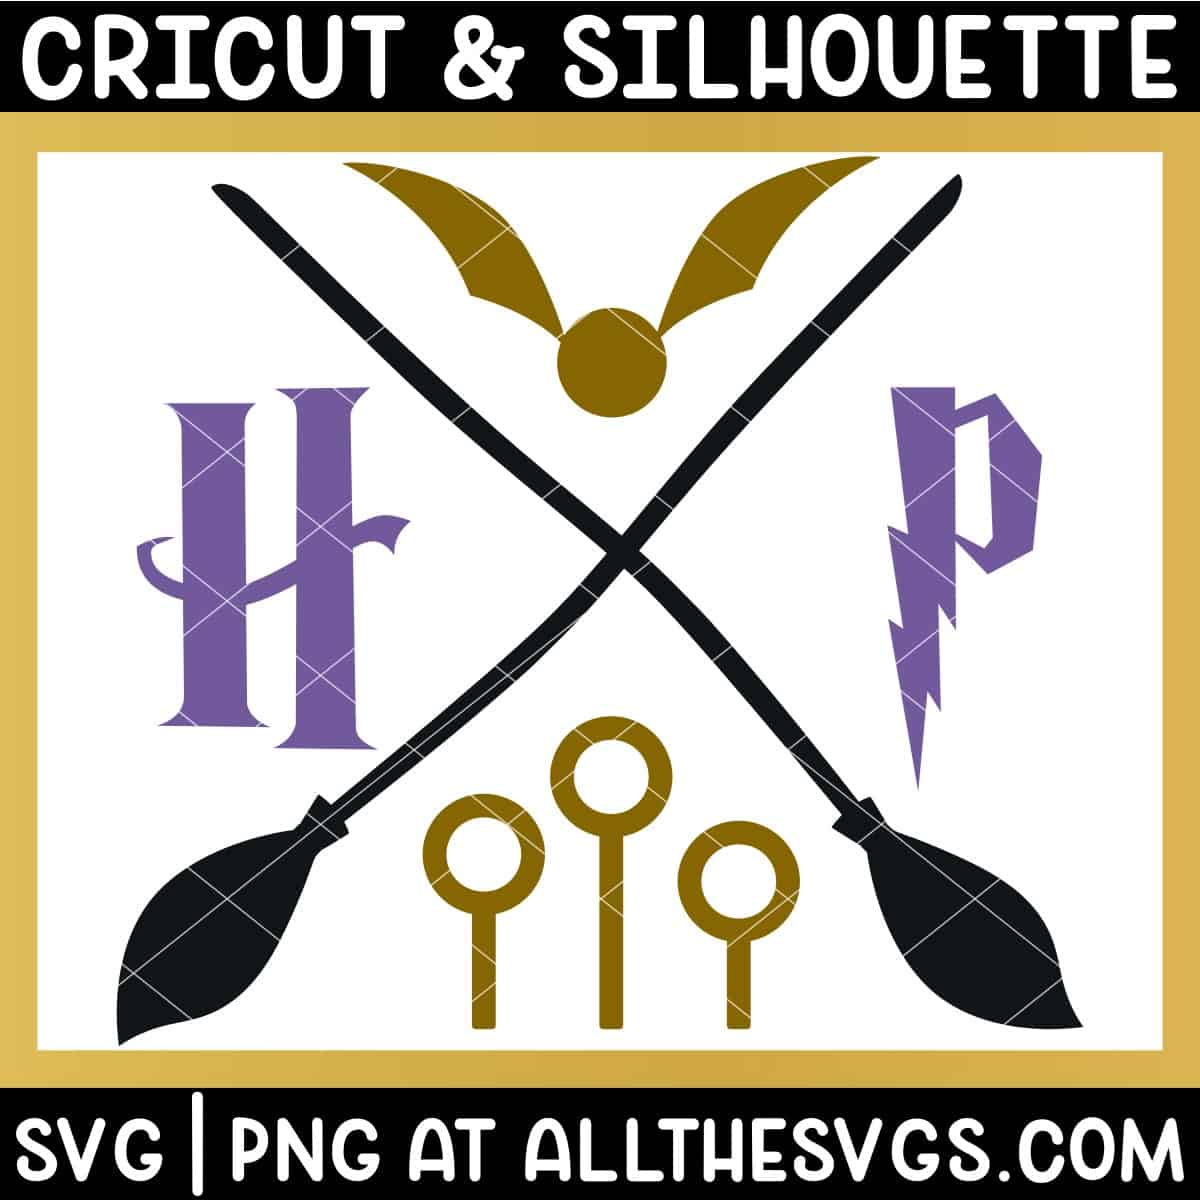 free harry potter svg png with broomstick cross, golden snitch, quidditch goal hoops, hp initials.